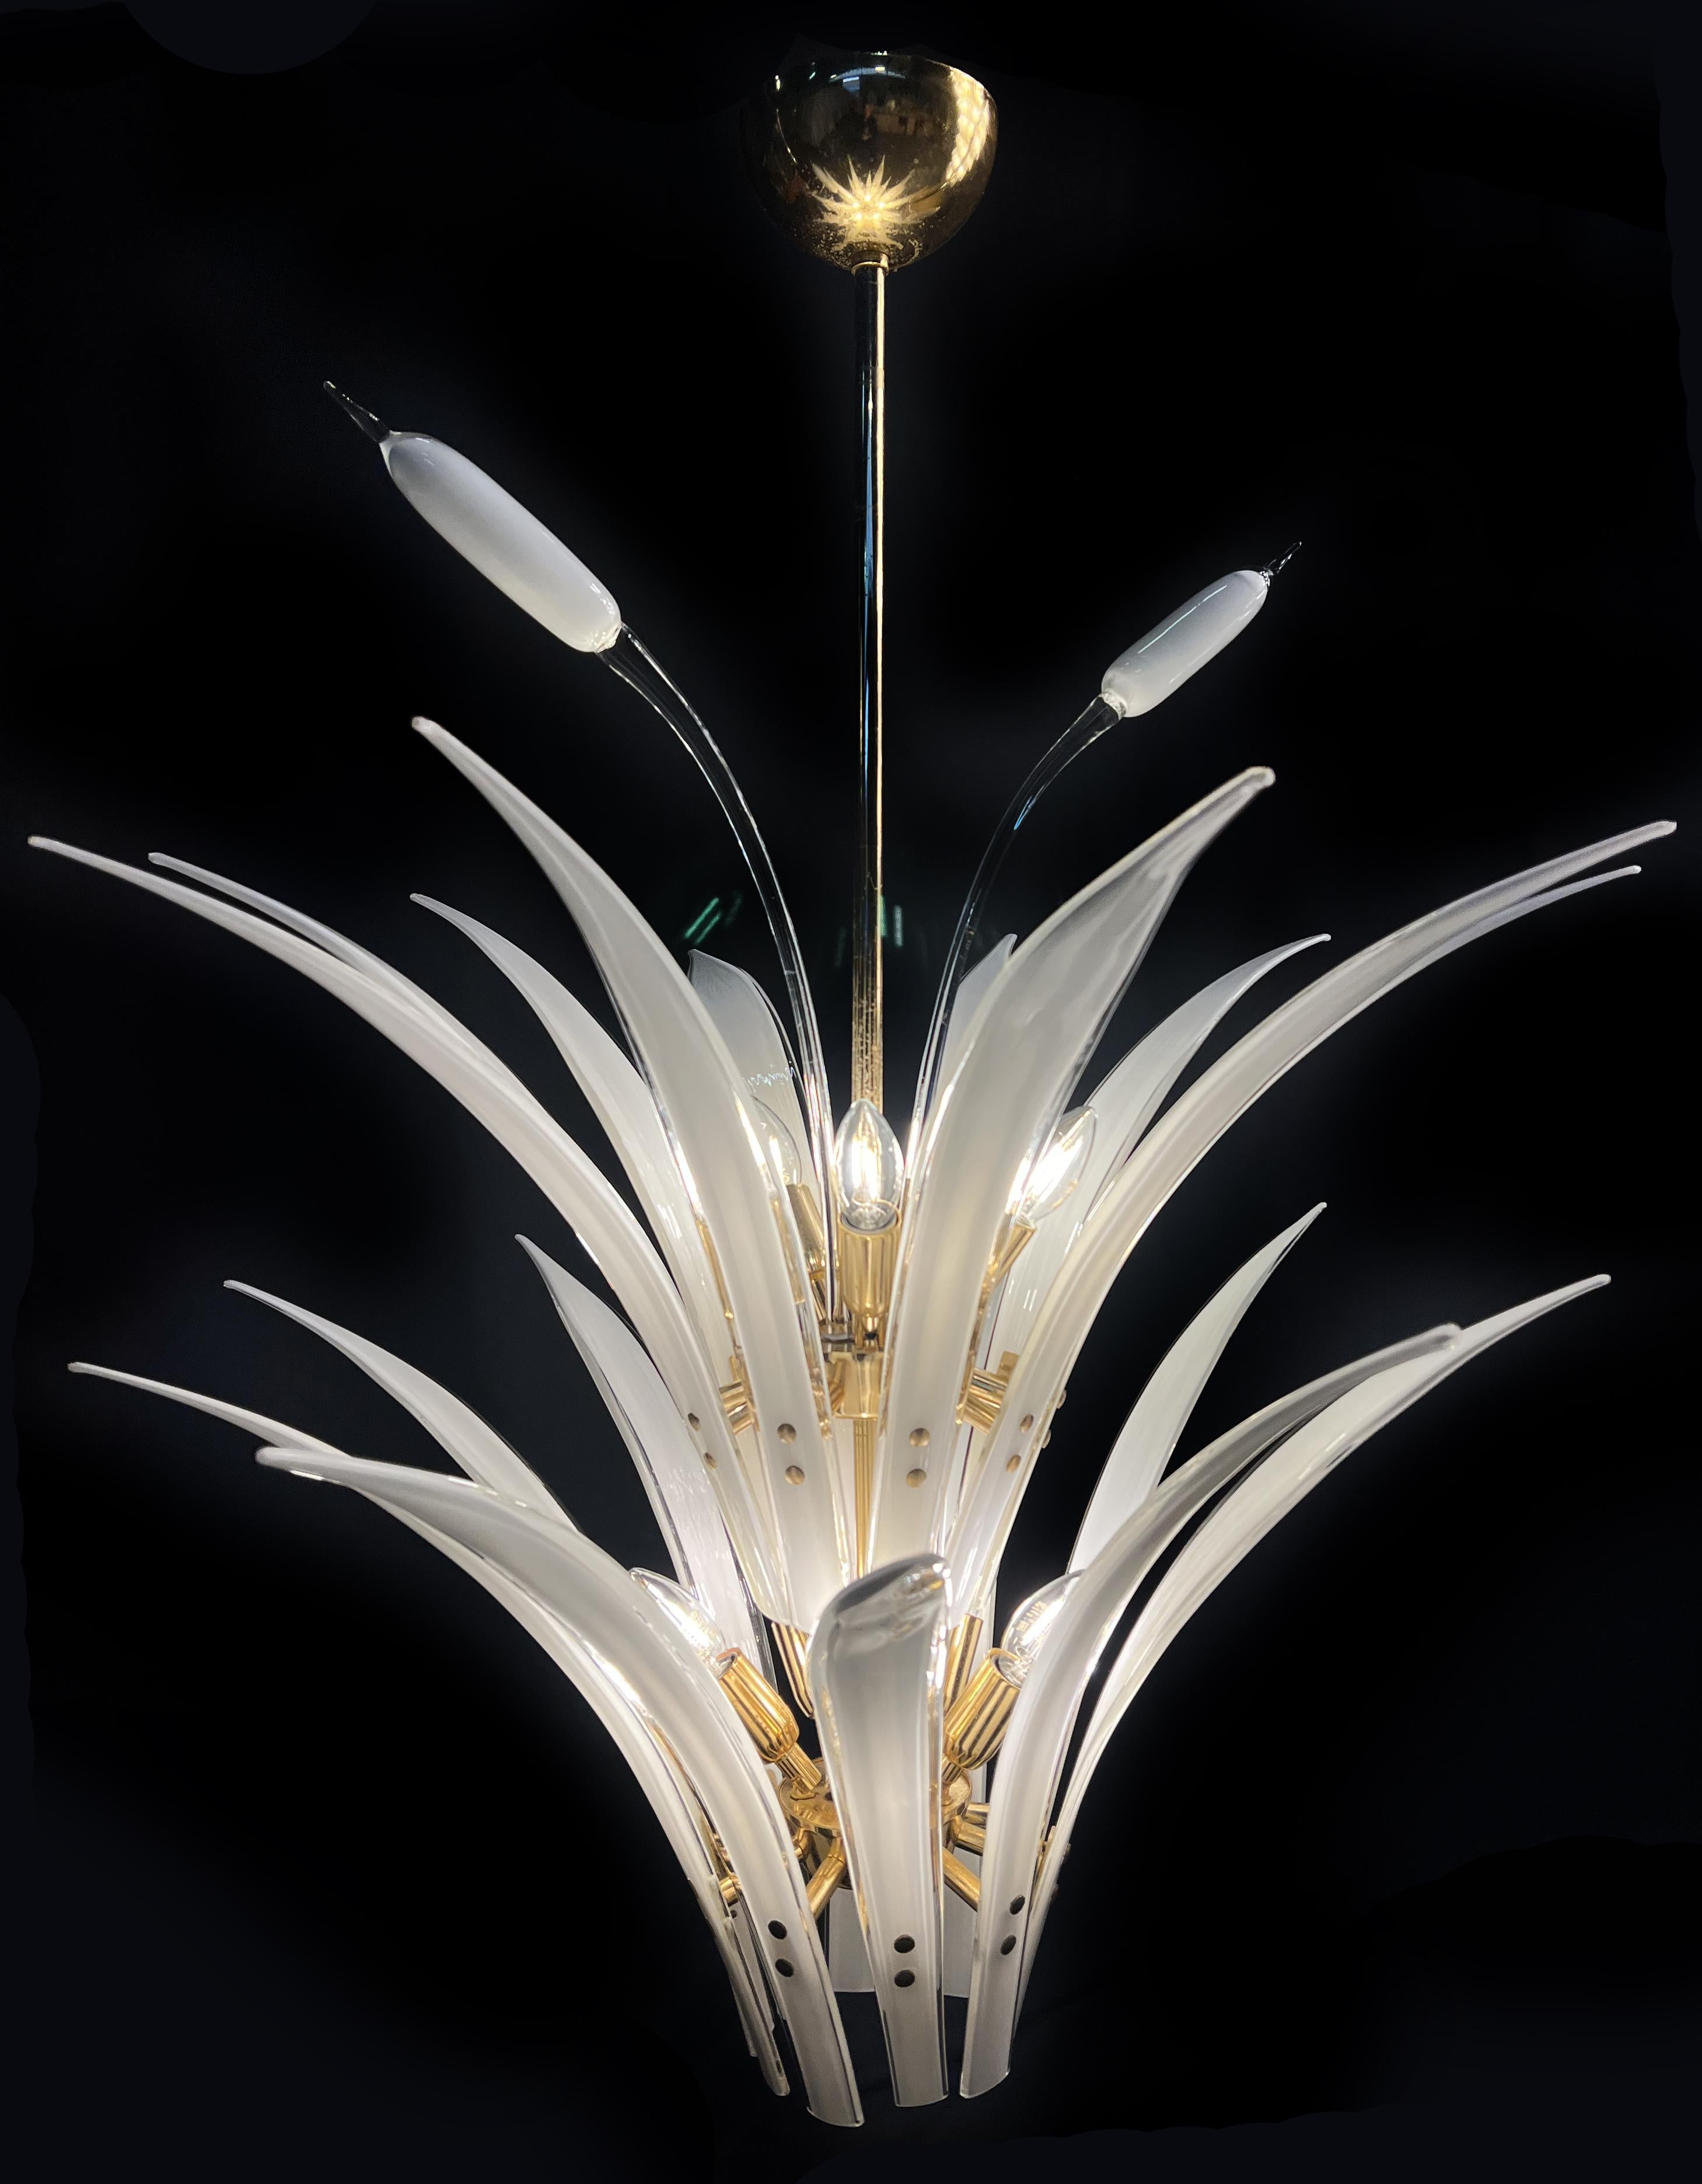 The chandelier consist of 20 palm leaves,
10 lights e14
3 flowers
20 leaves 46 cm.